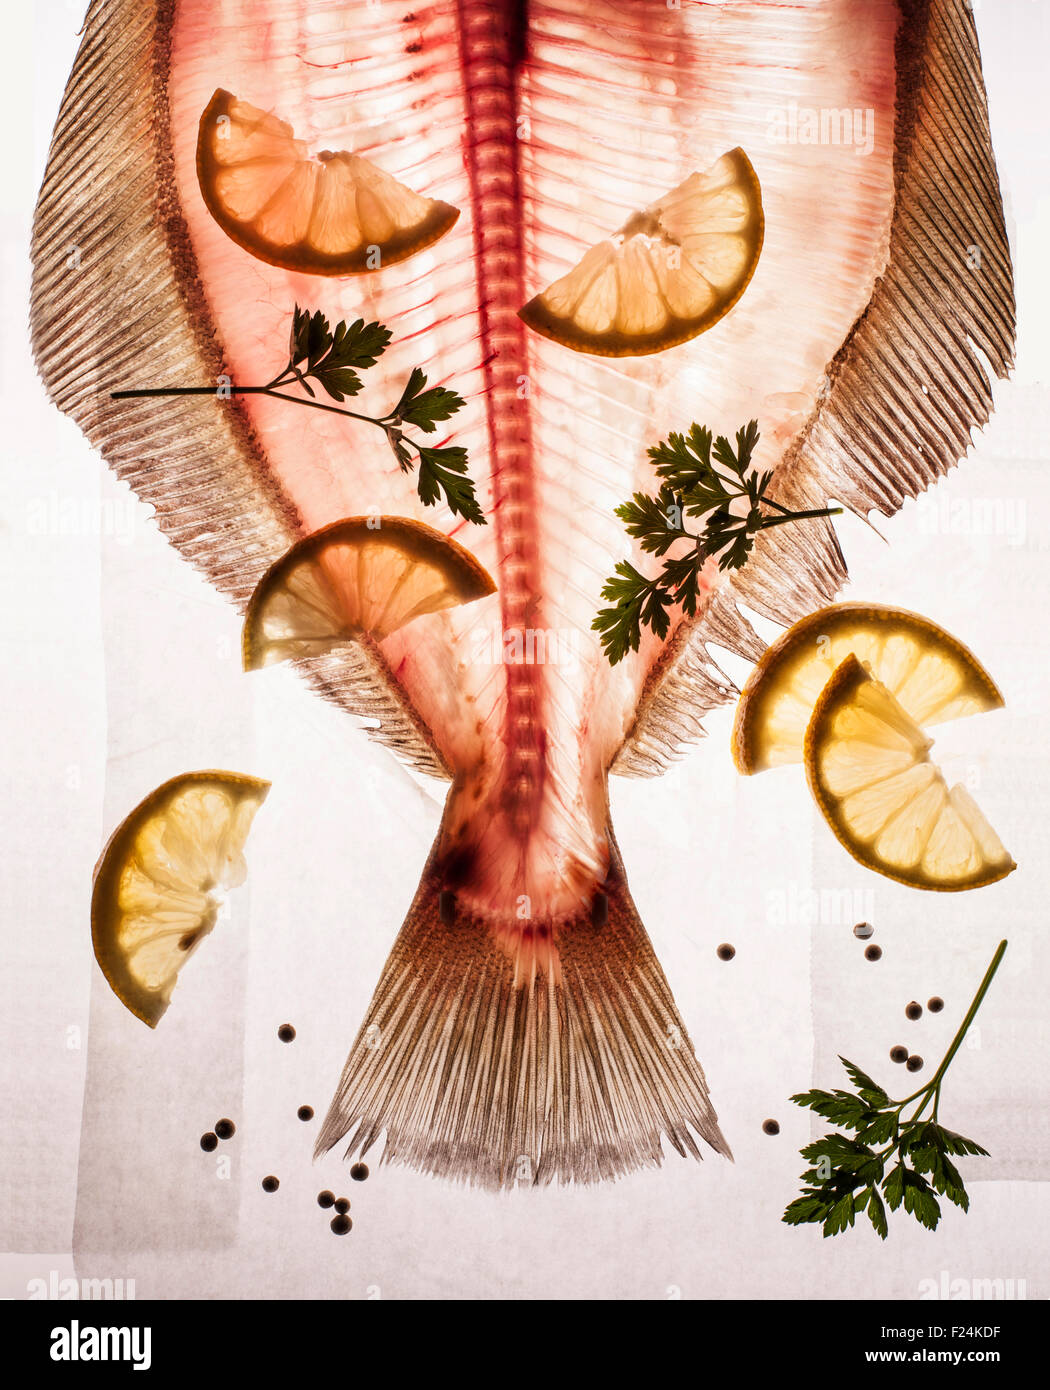 Pink translucent headless fish with bones, tail and fins on light table with lemon and parsley Stock Photo